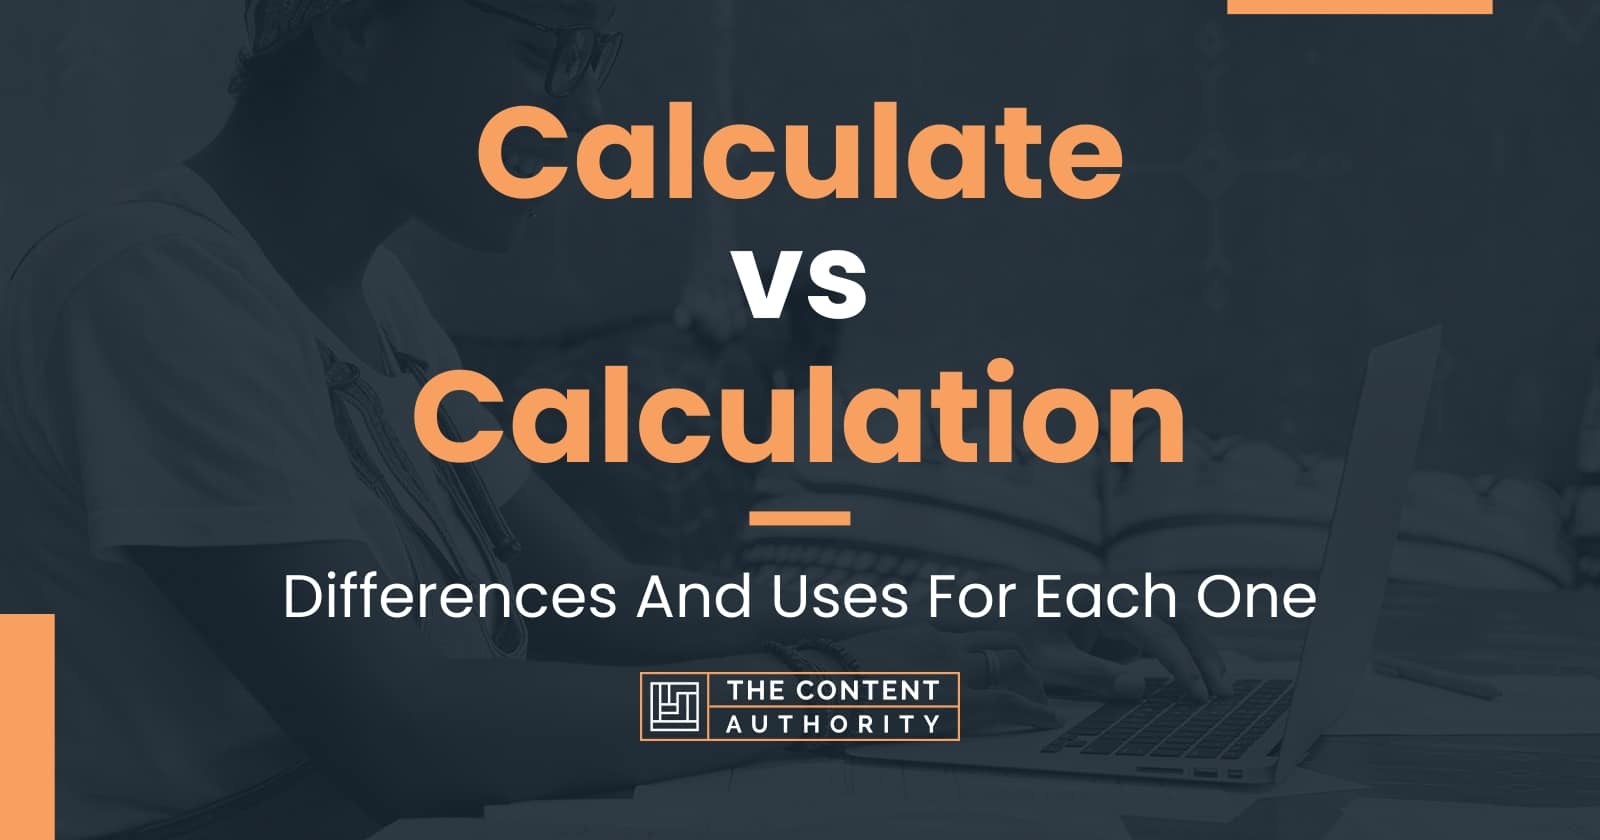 Calculate vs Calculation: Differences And Uses For Each One